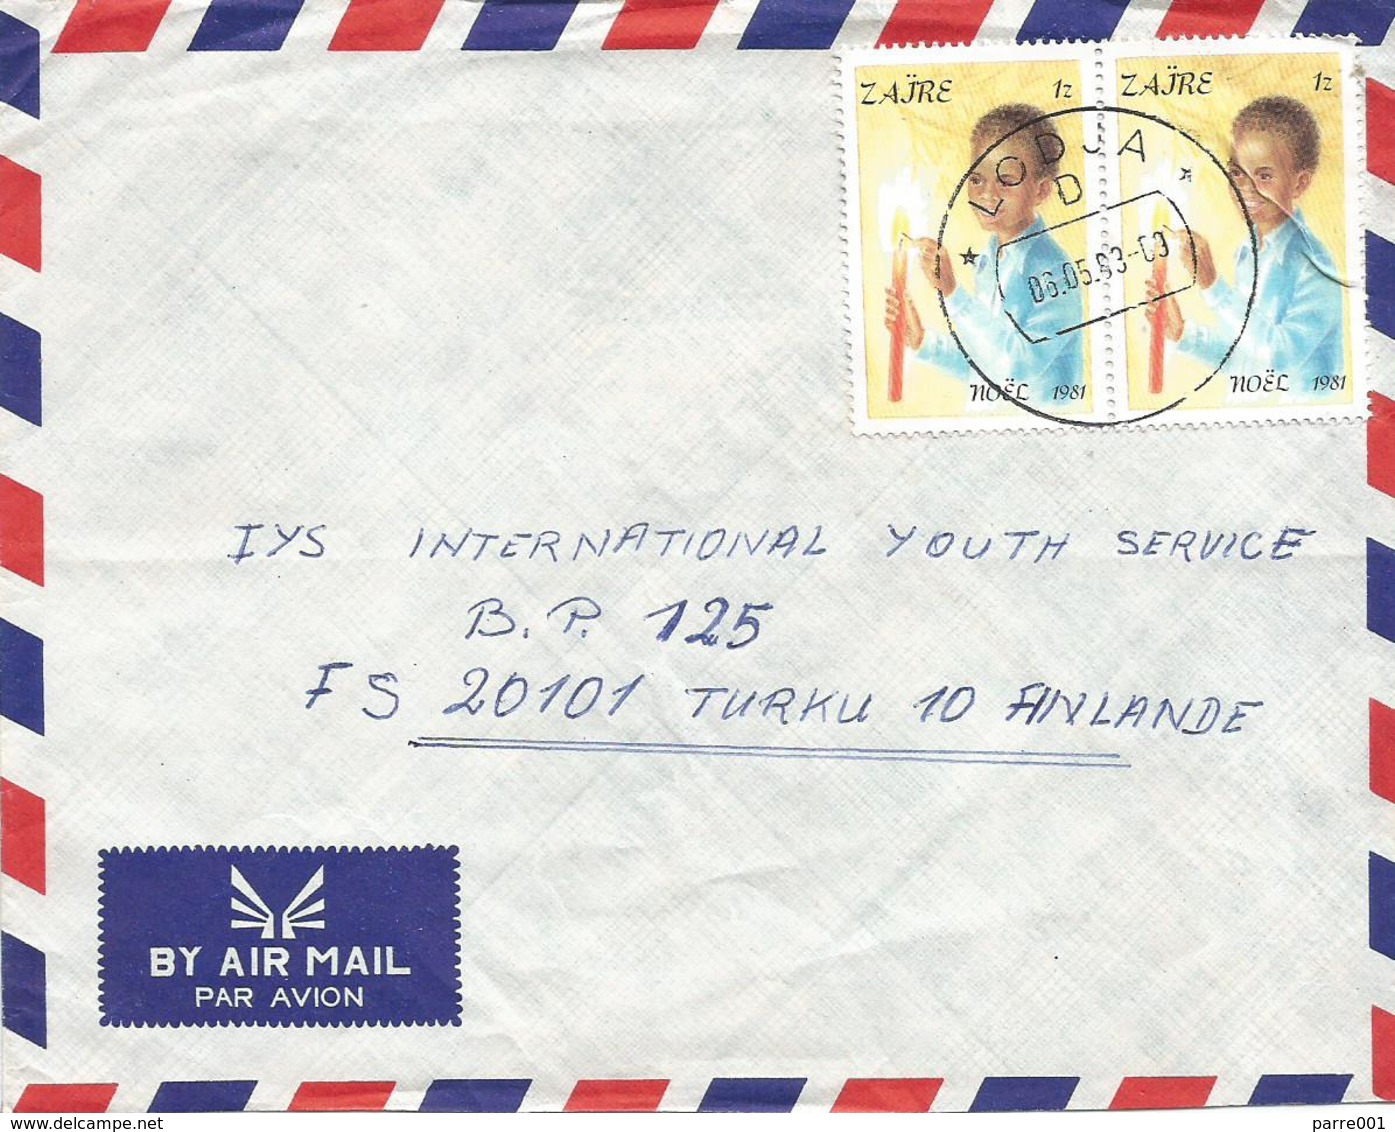 DRC RDC Zaire Congo 1983 Lodja Code Letter D Noel Christmas Candle 1Z Cover - Usados